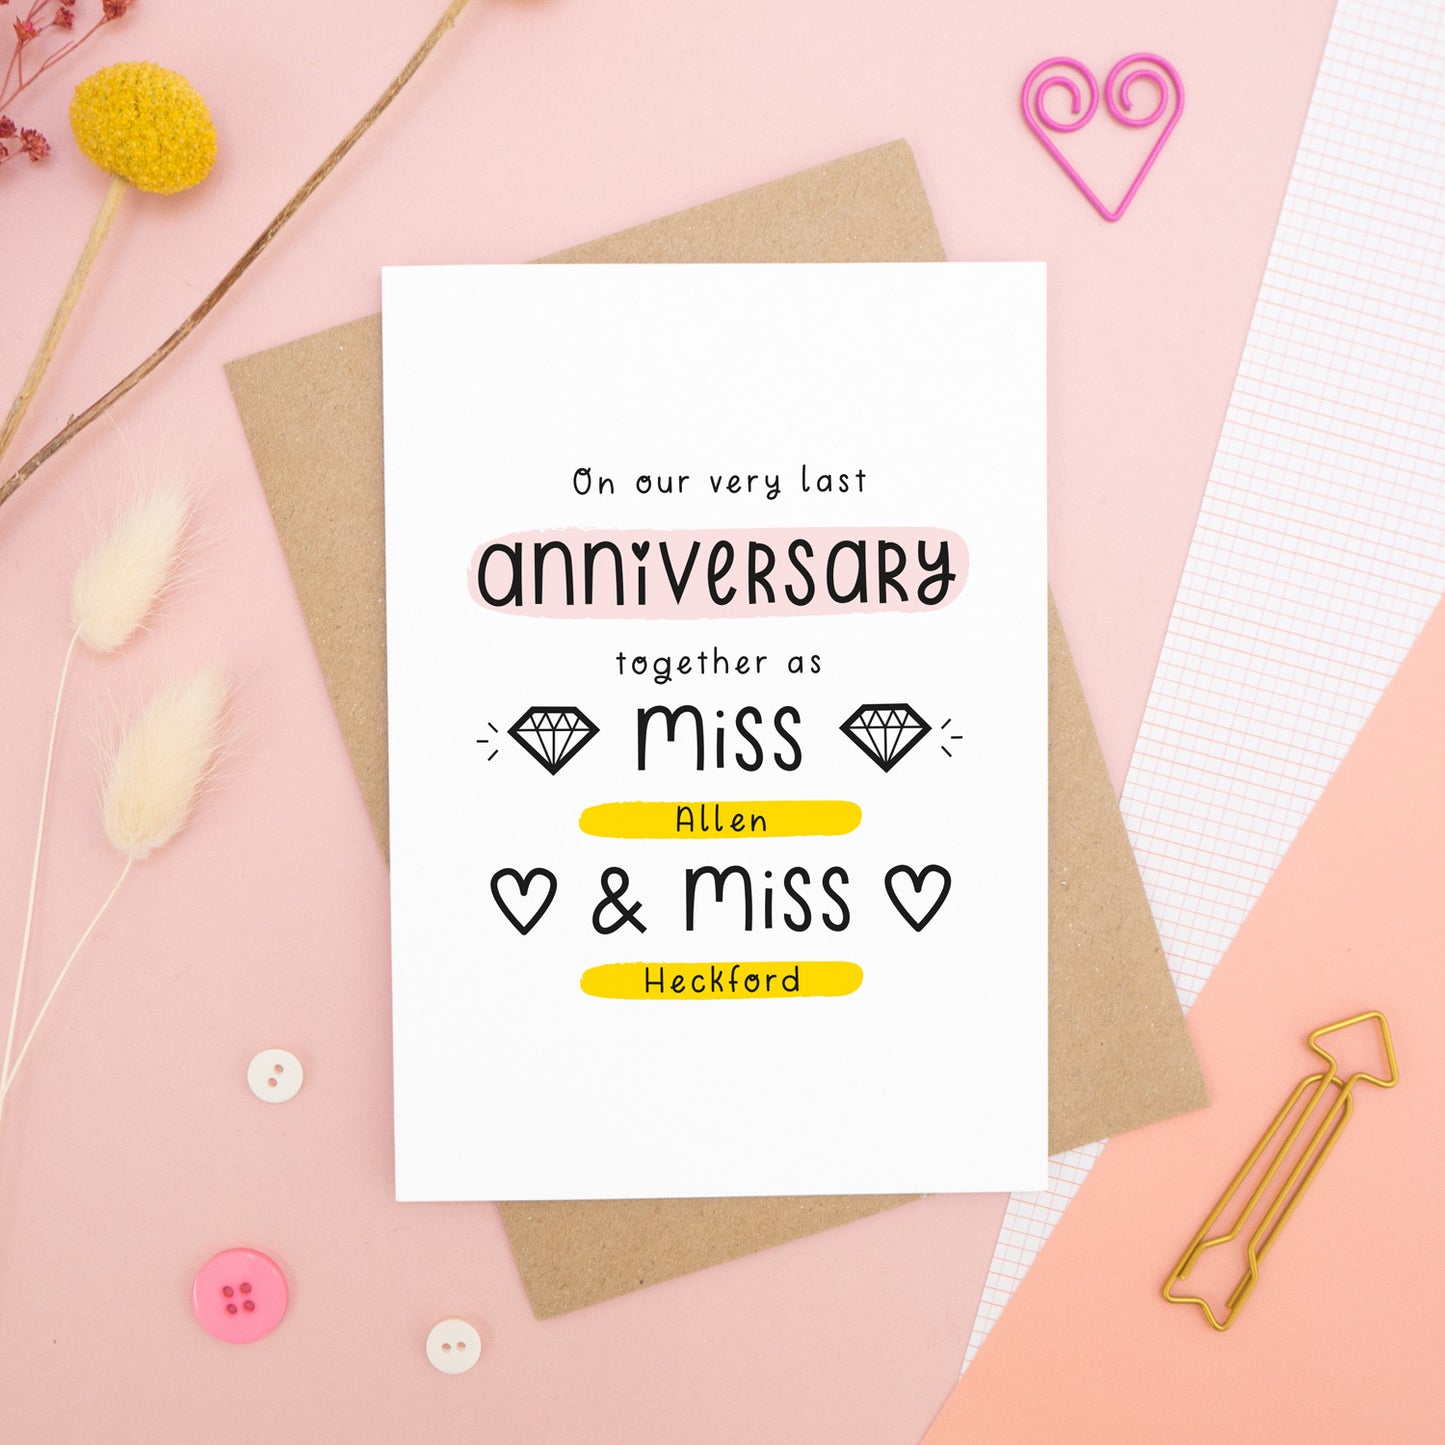 A personalised last anniversary or Valentine’s card photographed on a pink background with floral props, paper clips, and buttons. This image shows the last anniversary option with the Miss & Miss wording. The text is black and there are pops of yellow and pink behind key words.